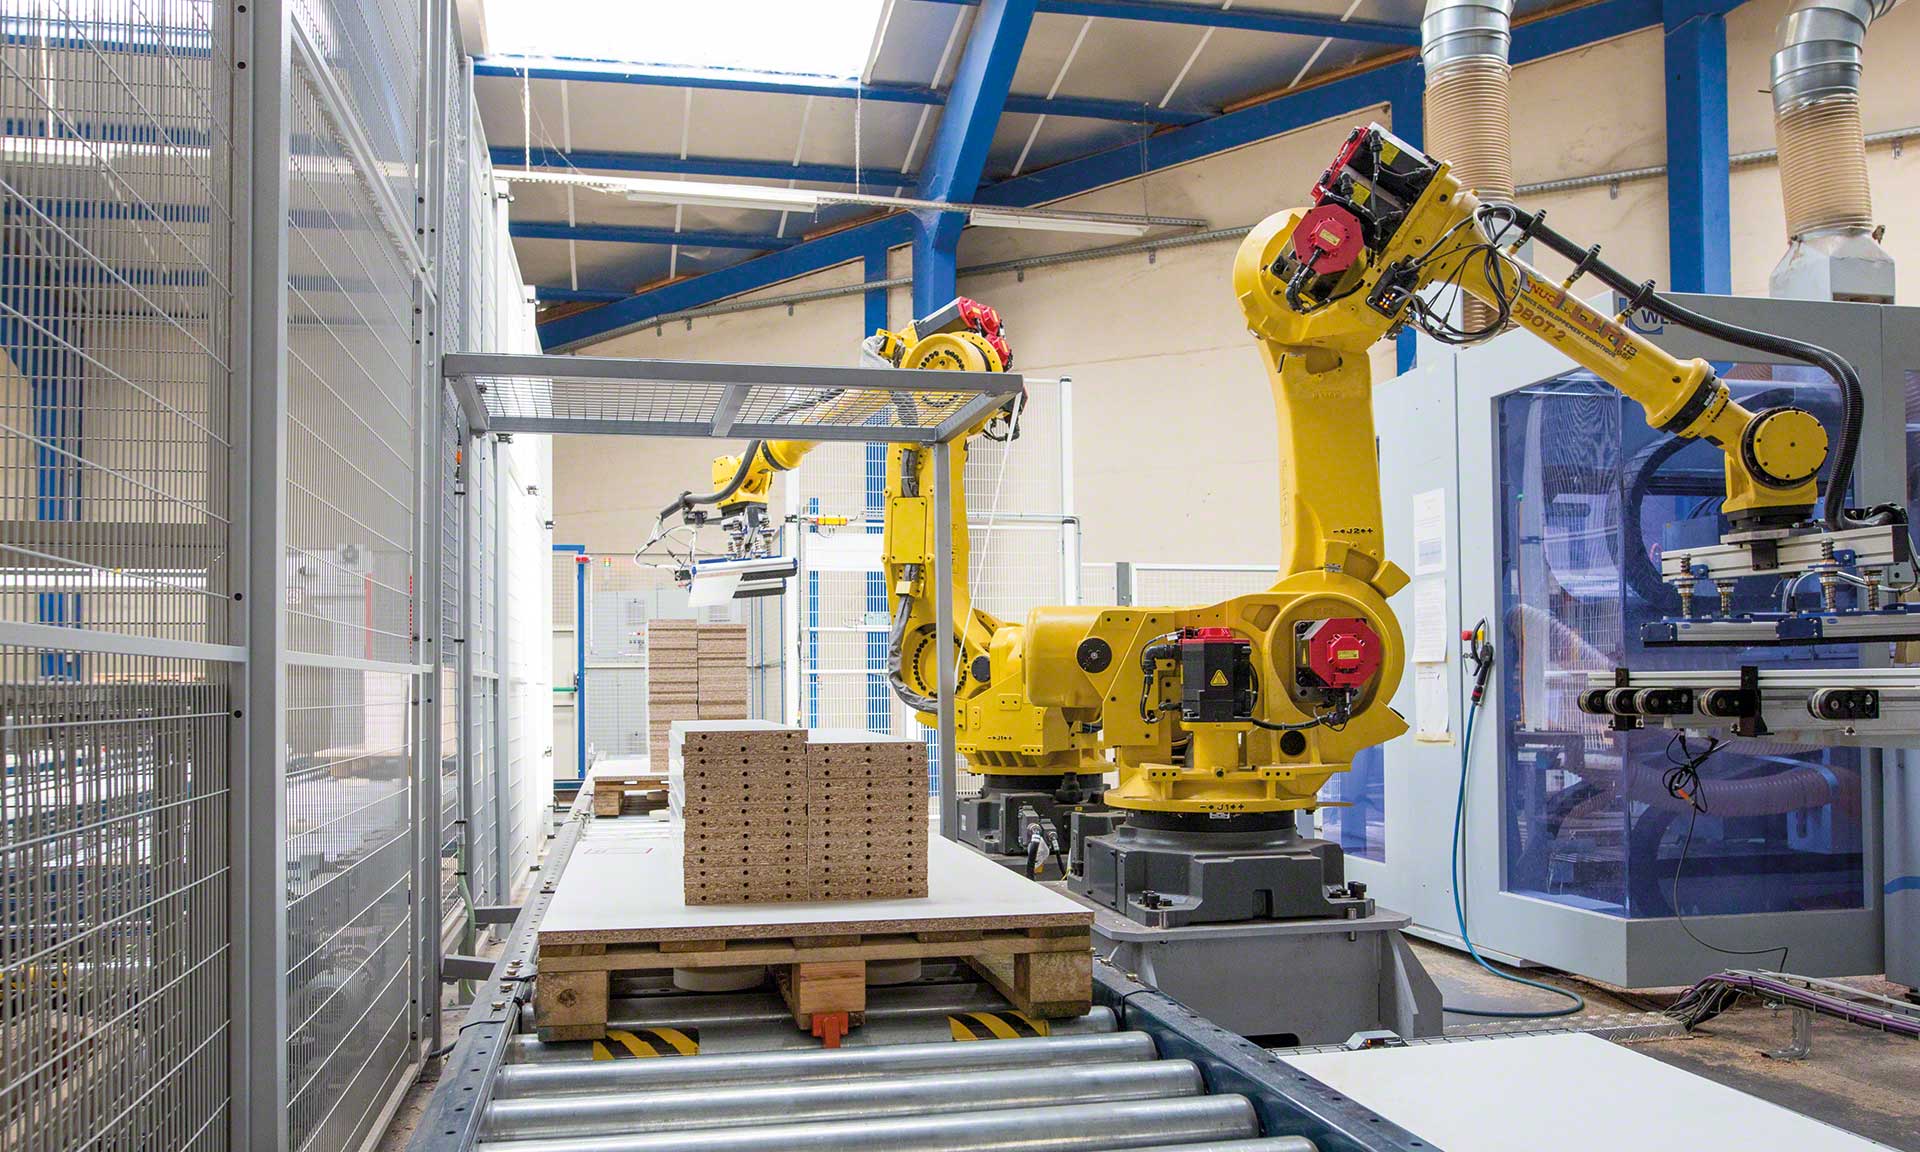 Picking robots bring speed and accuracy to order processing